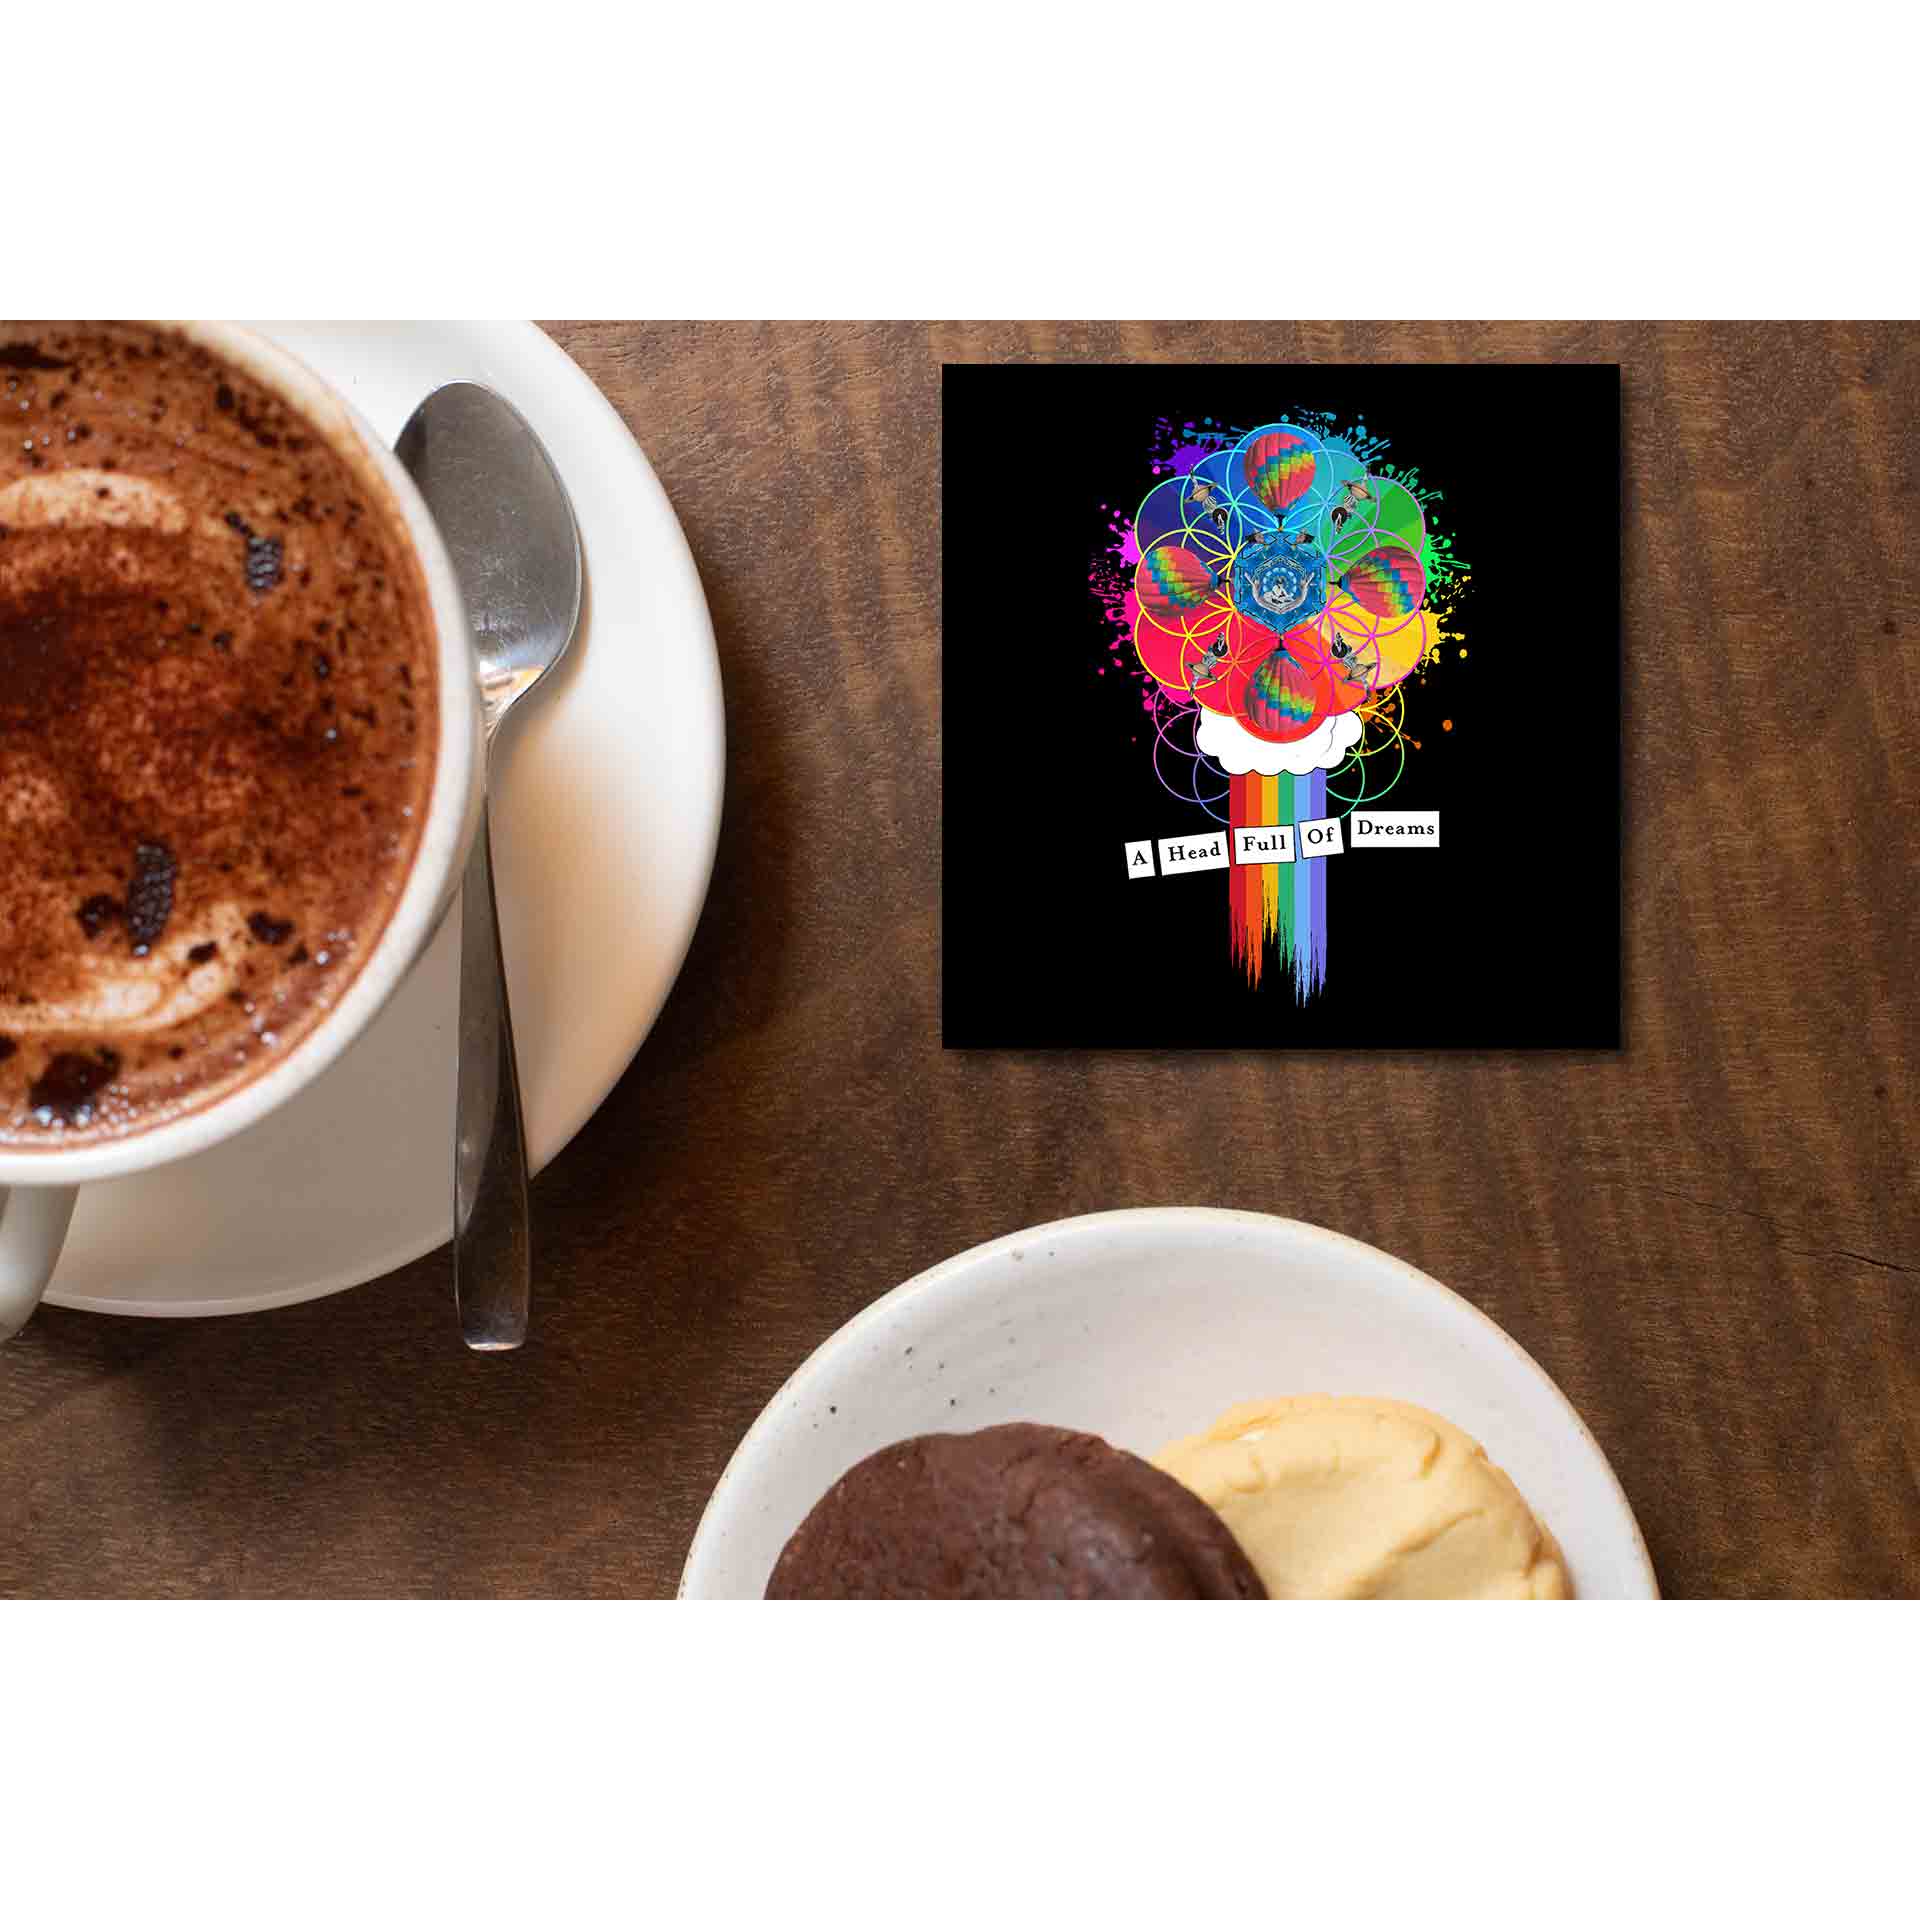 coldplay a head full of dreams coasters wooden table cups indian music band buy online india the banyan tee tbt men women girls boys unisex